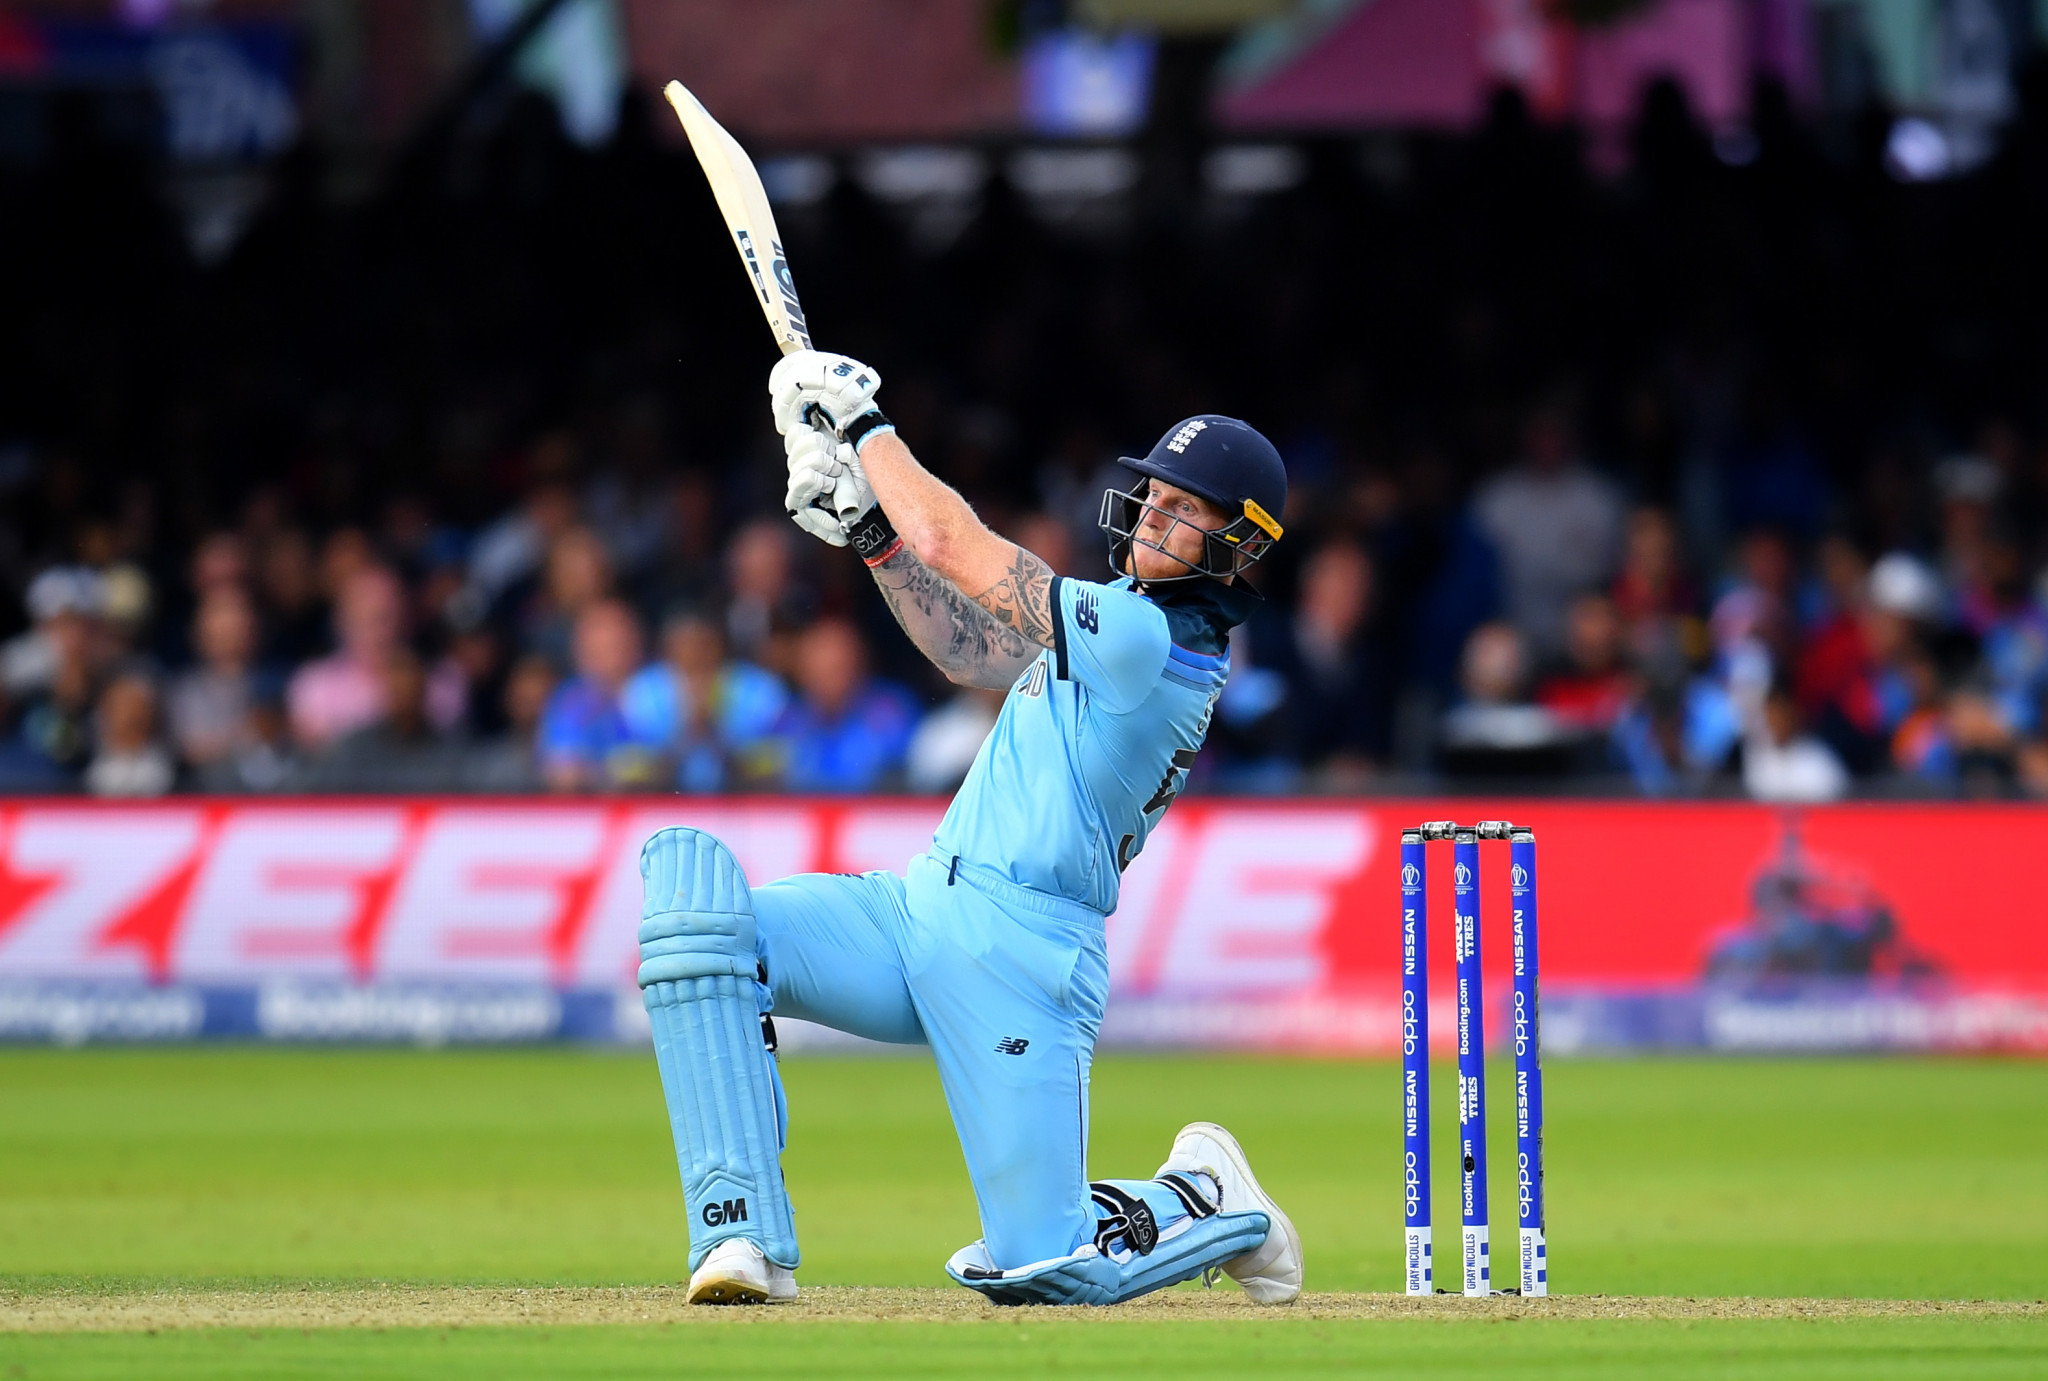 England appeared to be heading for defeat after losing four early wickets until Ben Stokes hit 84 to help them tie with New Zealand and setting up the dramatic super over ©Getty Images